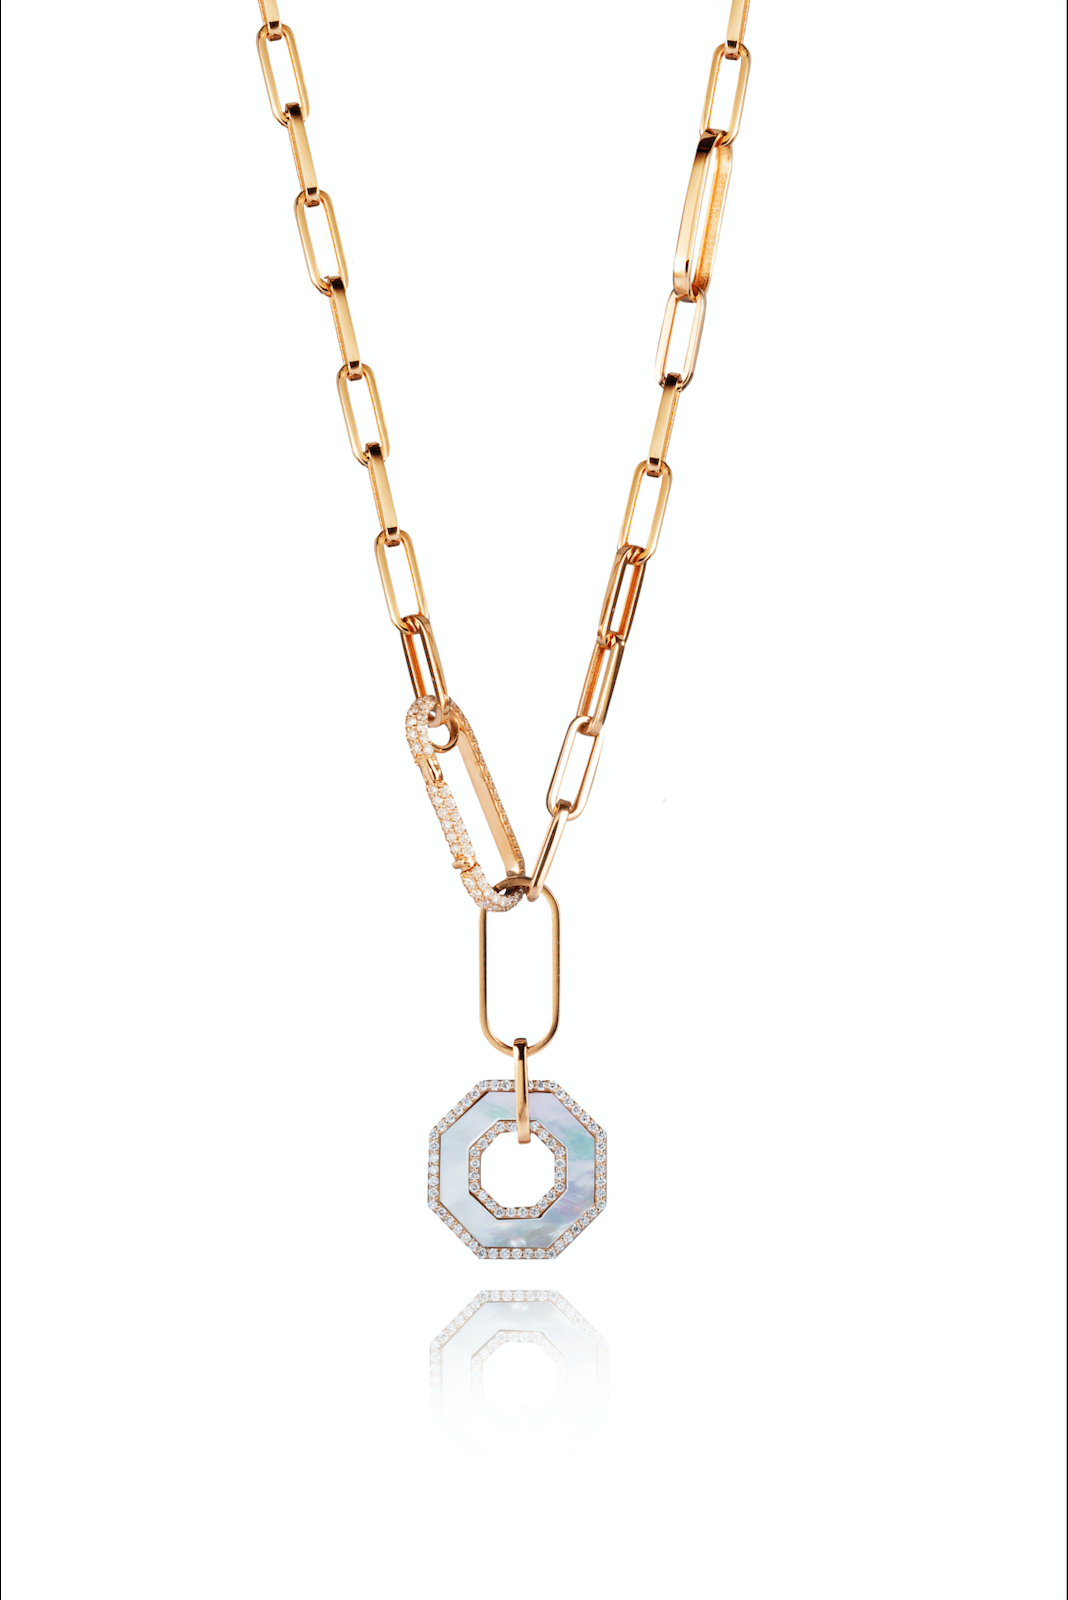 Gold and diamond chain necklace